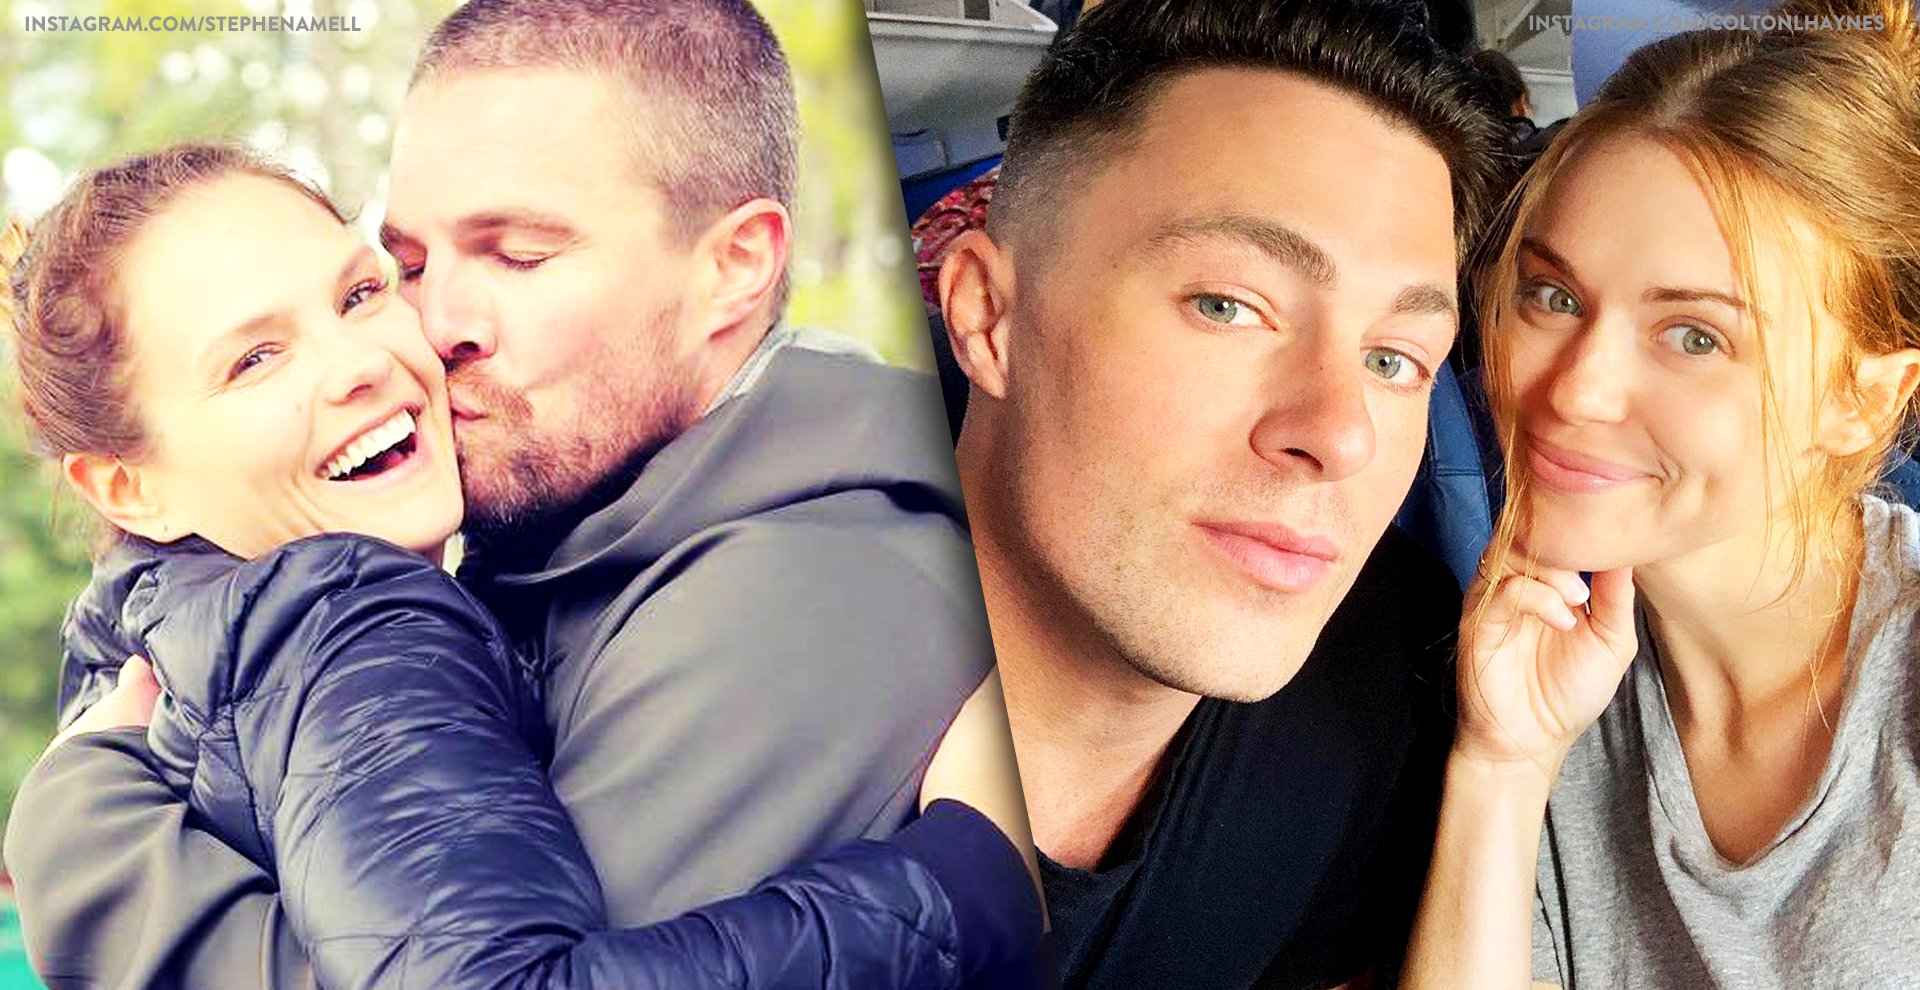 Emily Bett Rickards And Stephen Amell Kissing / Stephen Amell And Emily Bett Rickards On We Heart It